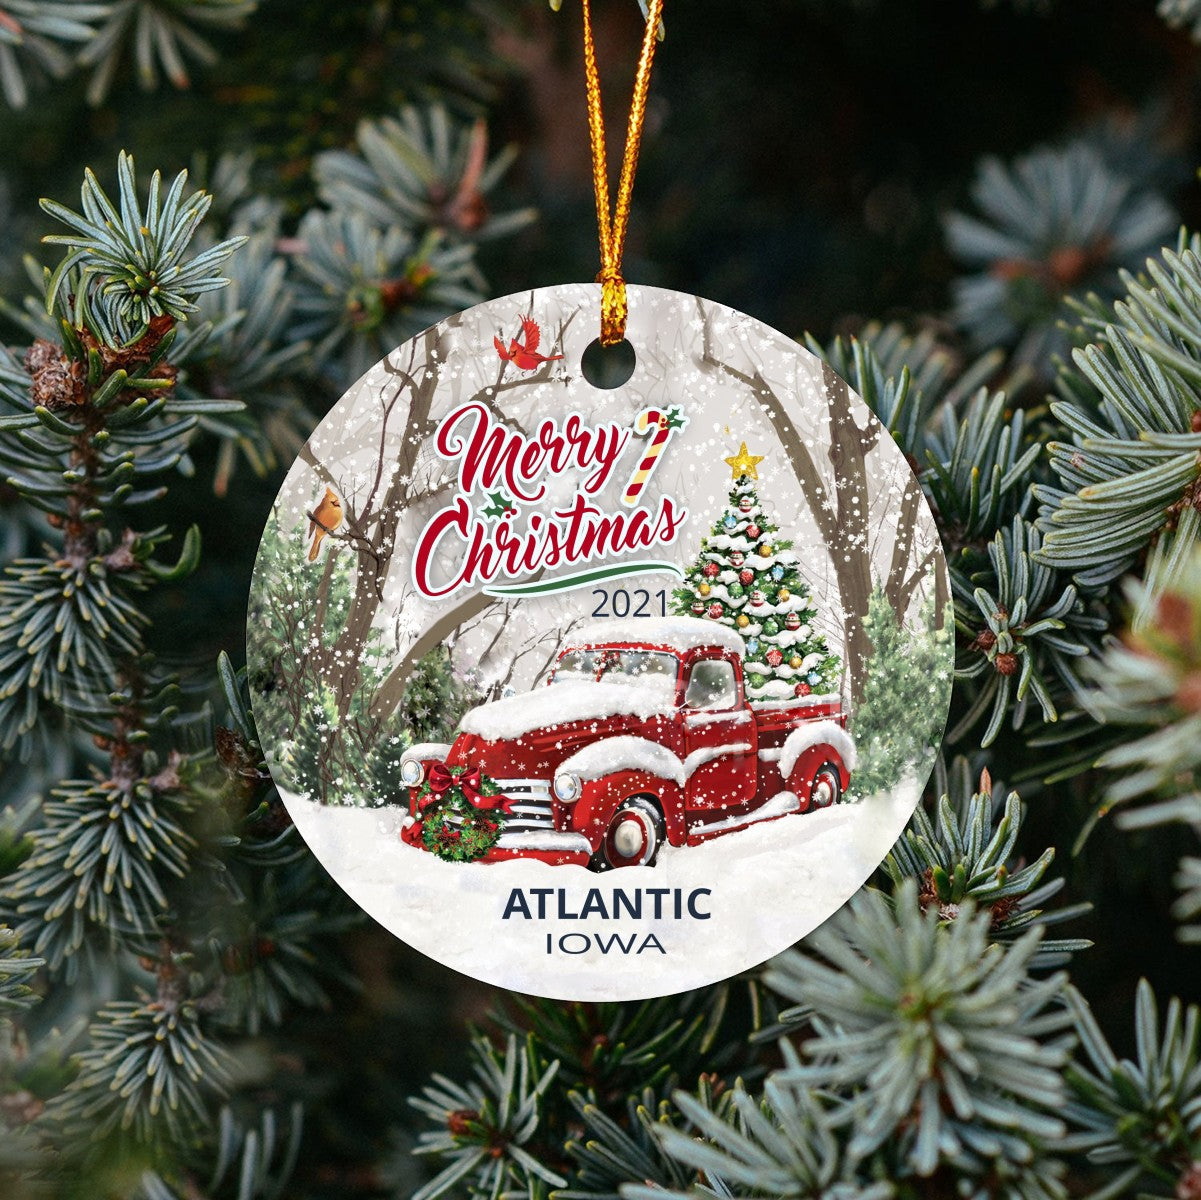 Christmas Tree Ornaments Atlantic - Ornament With Name City, State Atlantic Iowa IA Ornament - Red Truck Xmas Ornaments 3'' Plastic Gift For Family, Friend And Housewarming